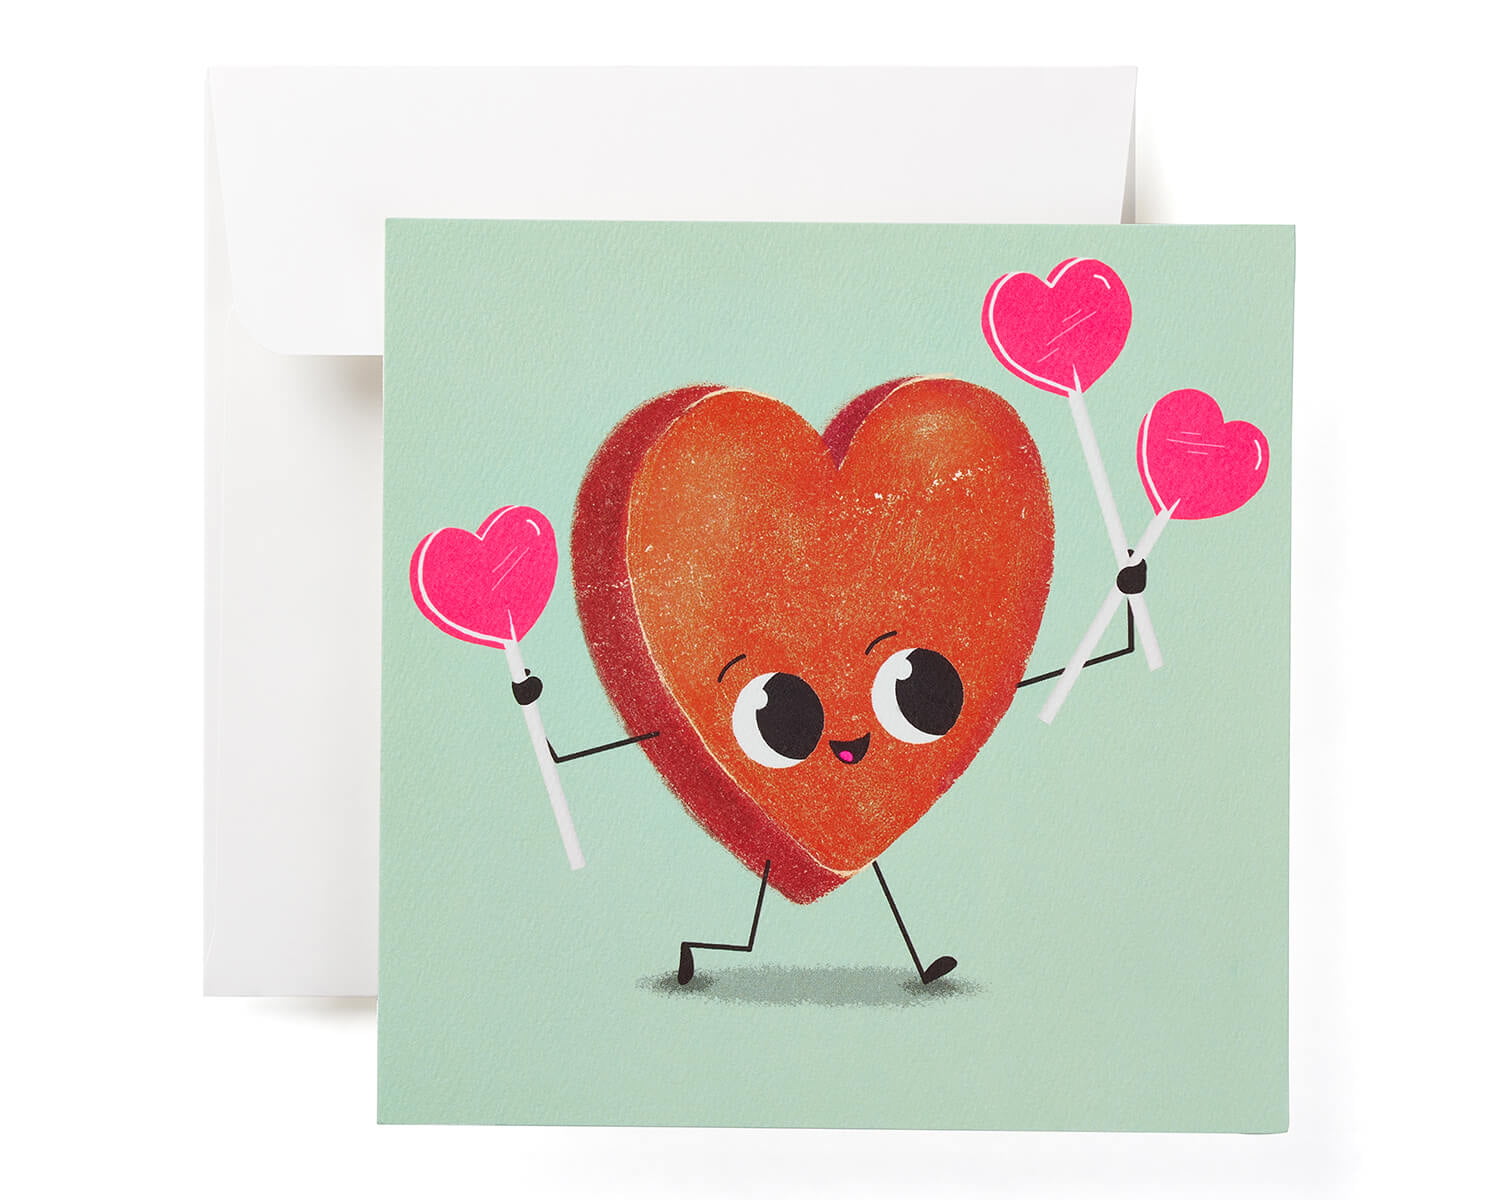 heart in mailbox Details about   American Greetings Tender Thoughts Valentine's Day Card